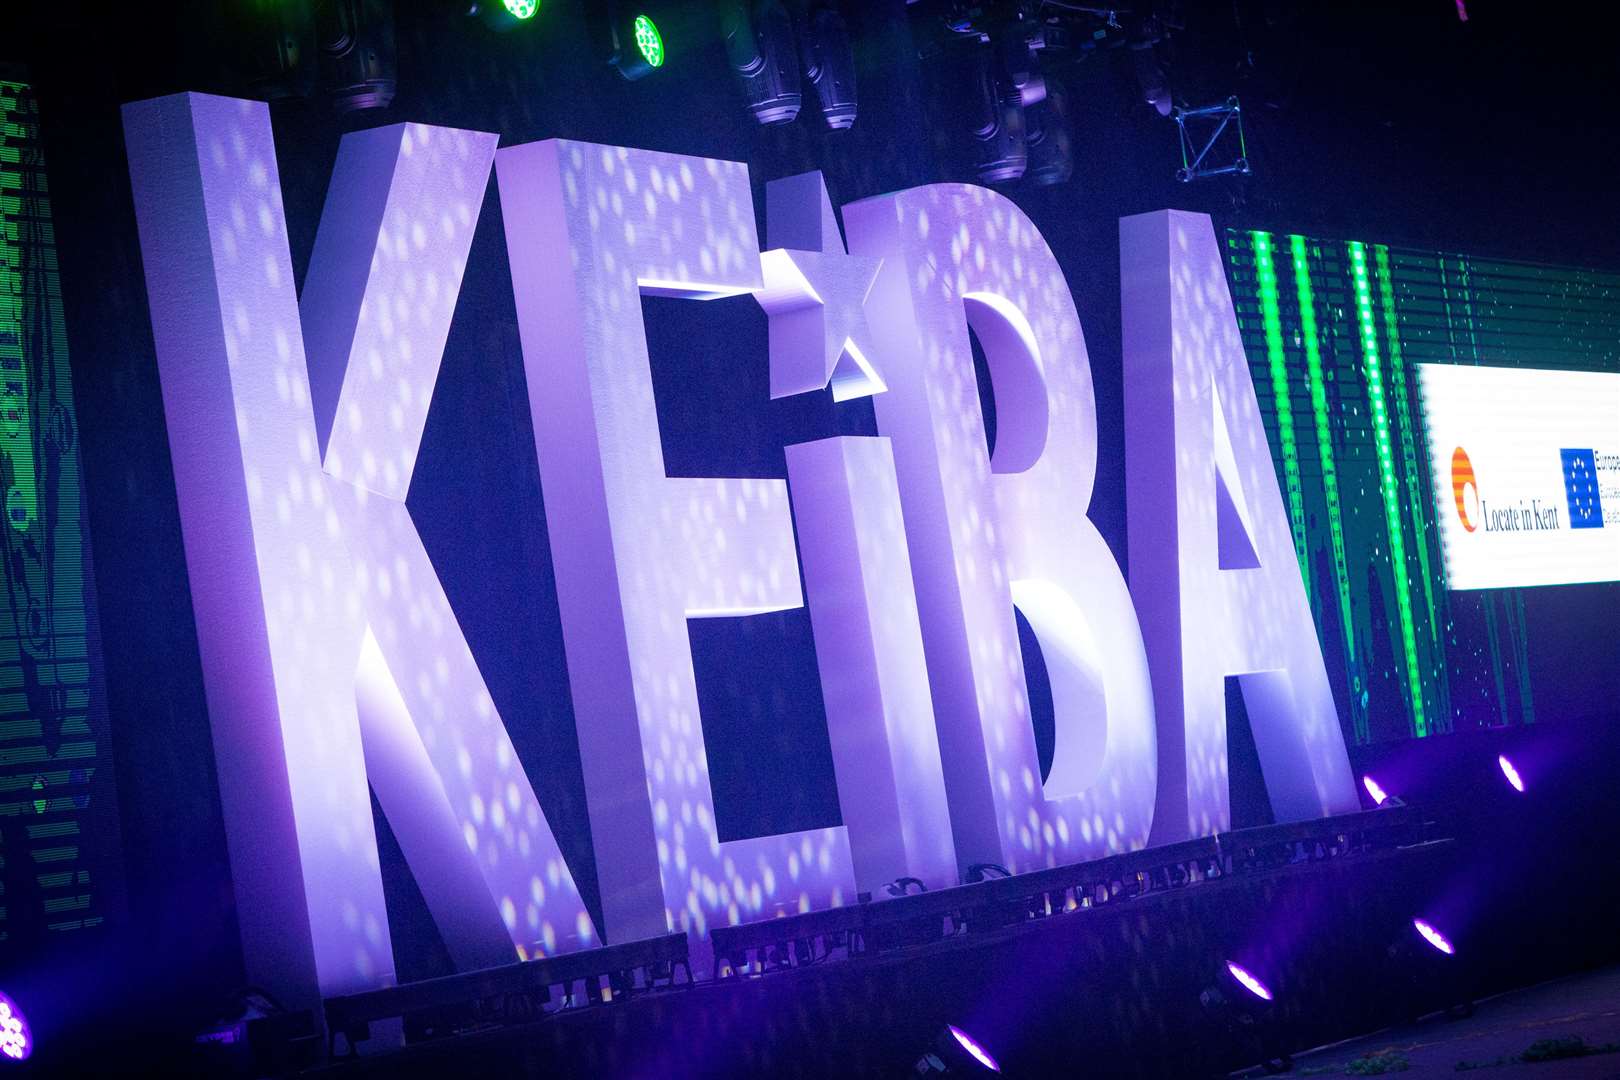 KEiBA returns for 2021 - and entries open later this month